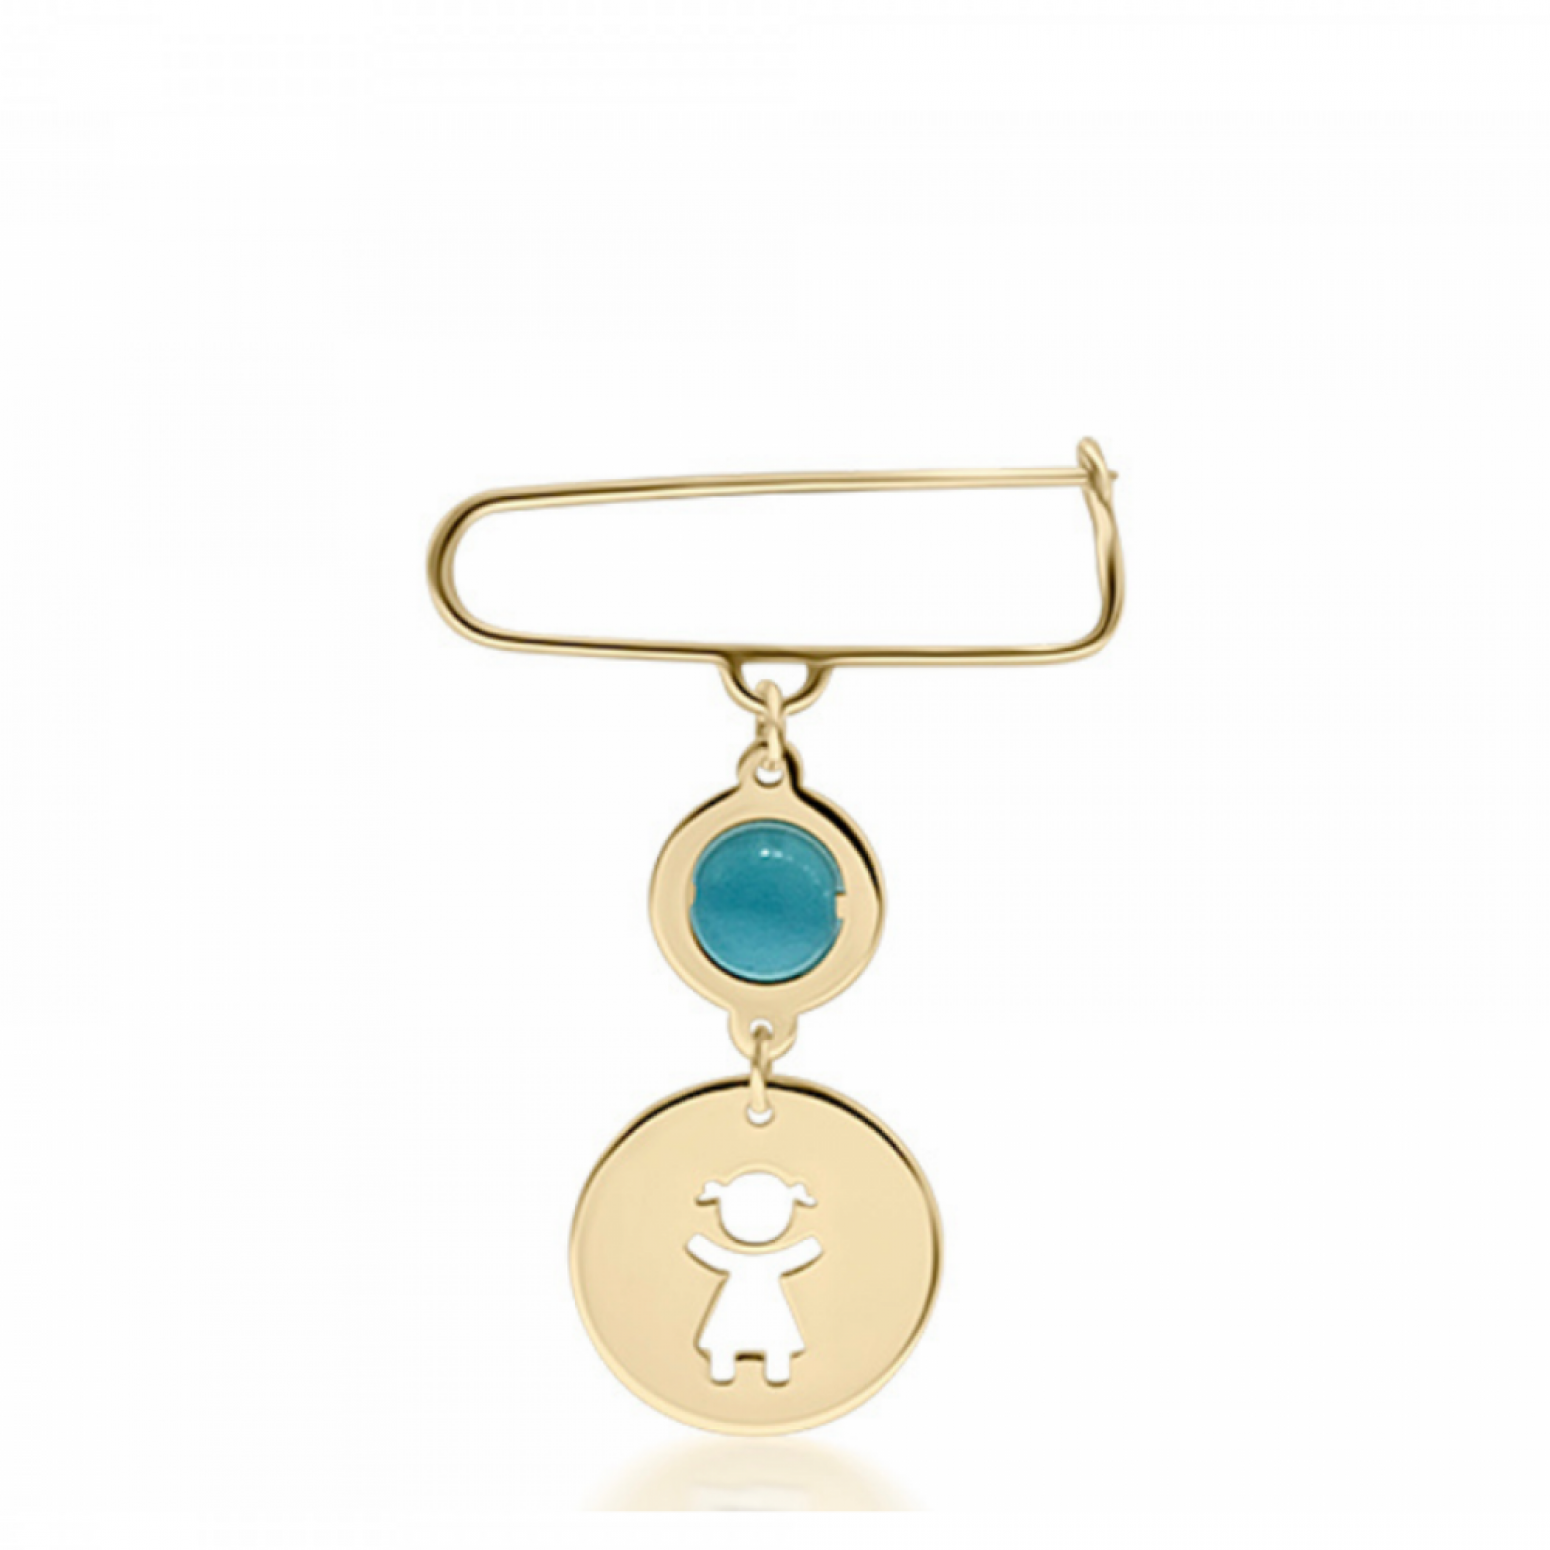 Babies pin K14 gold with girl and turquoise pf0051 BABIES Κοσμηματα - chrilia.gr